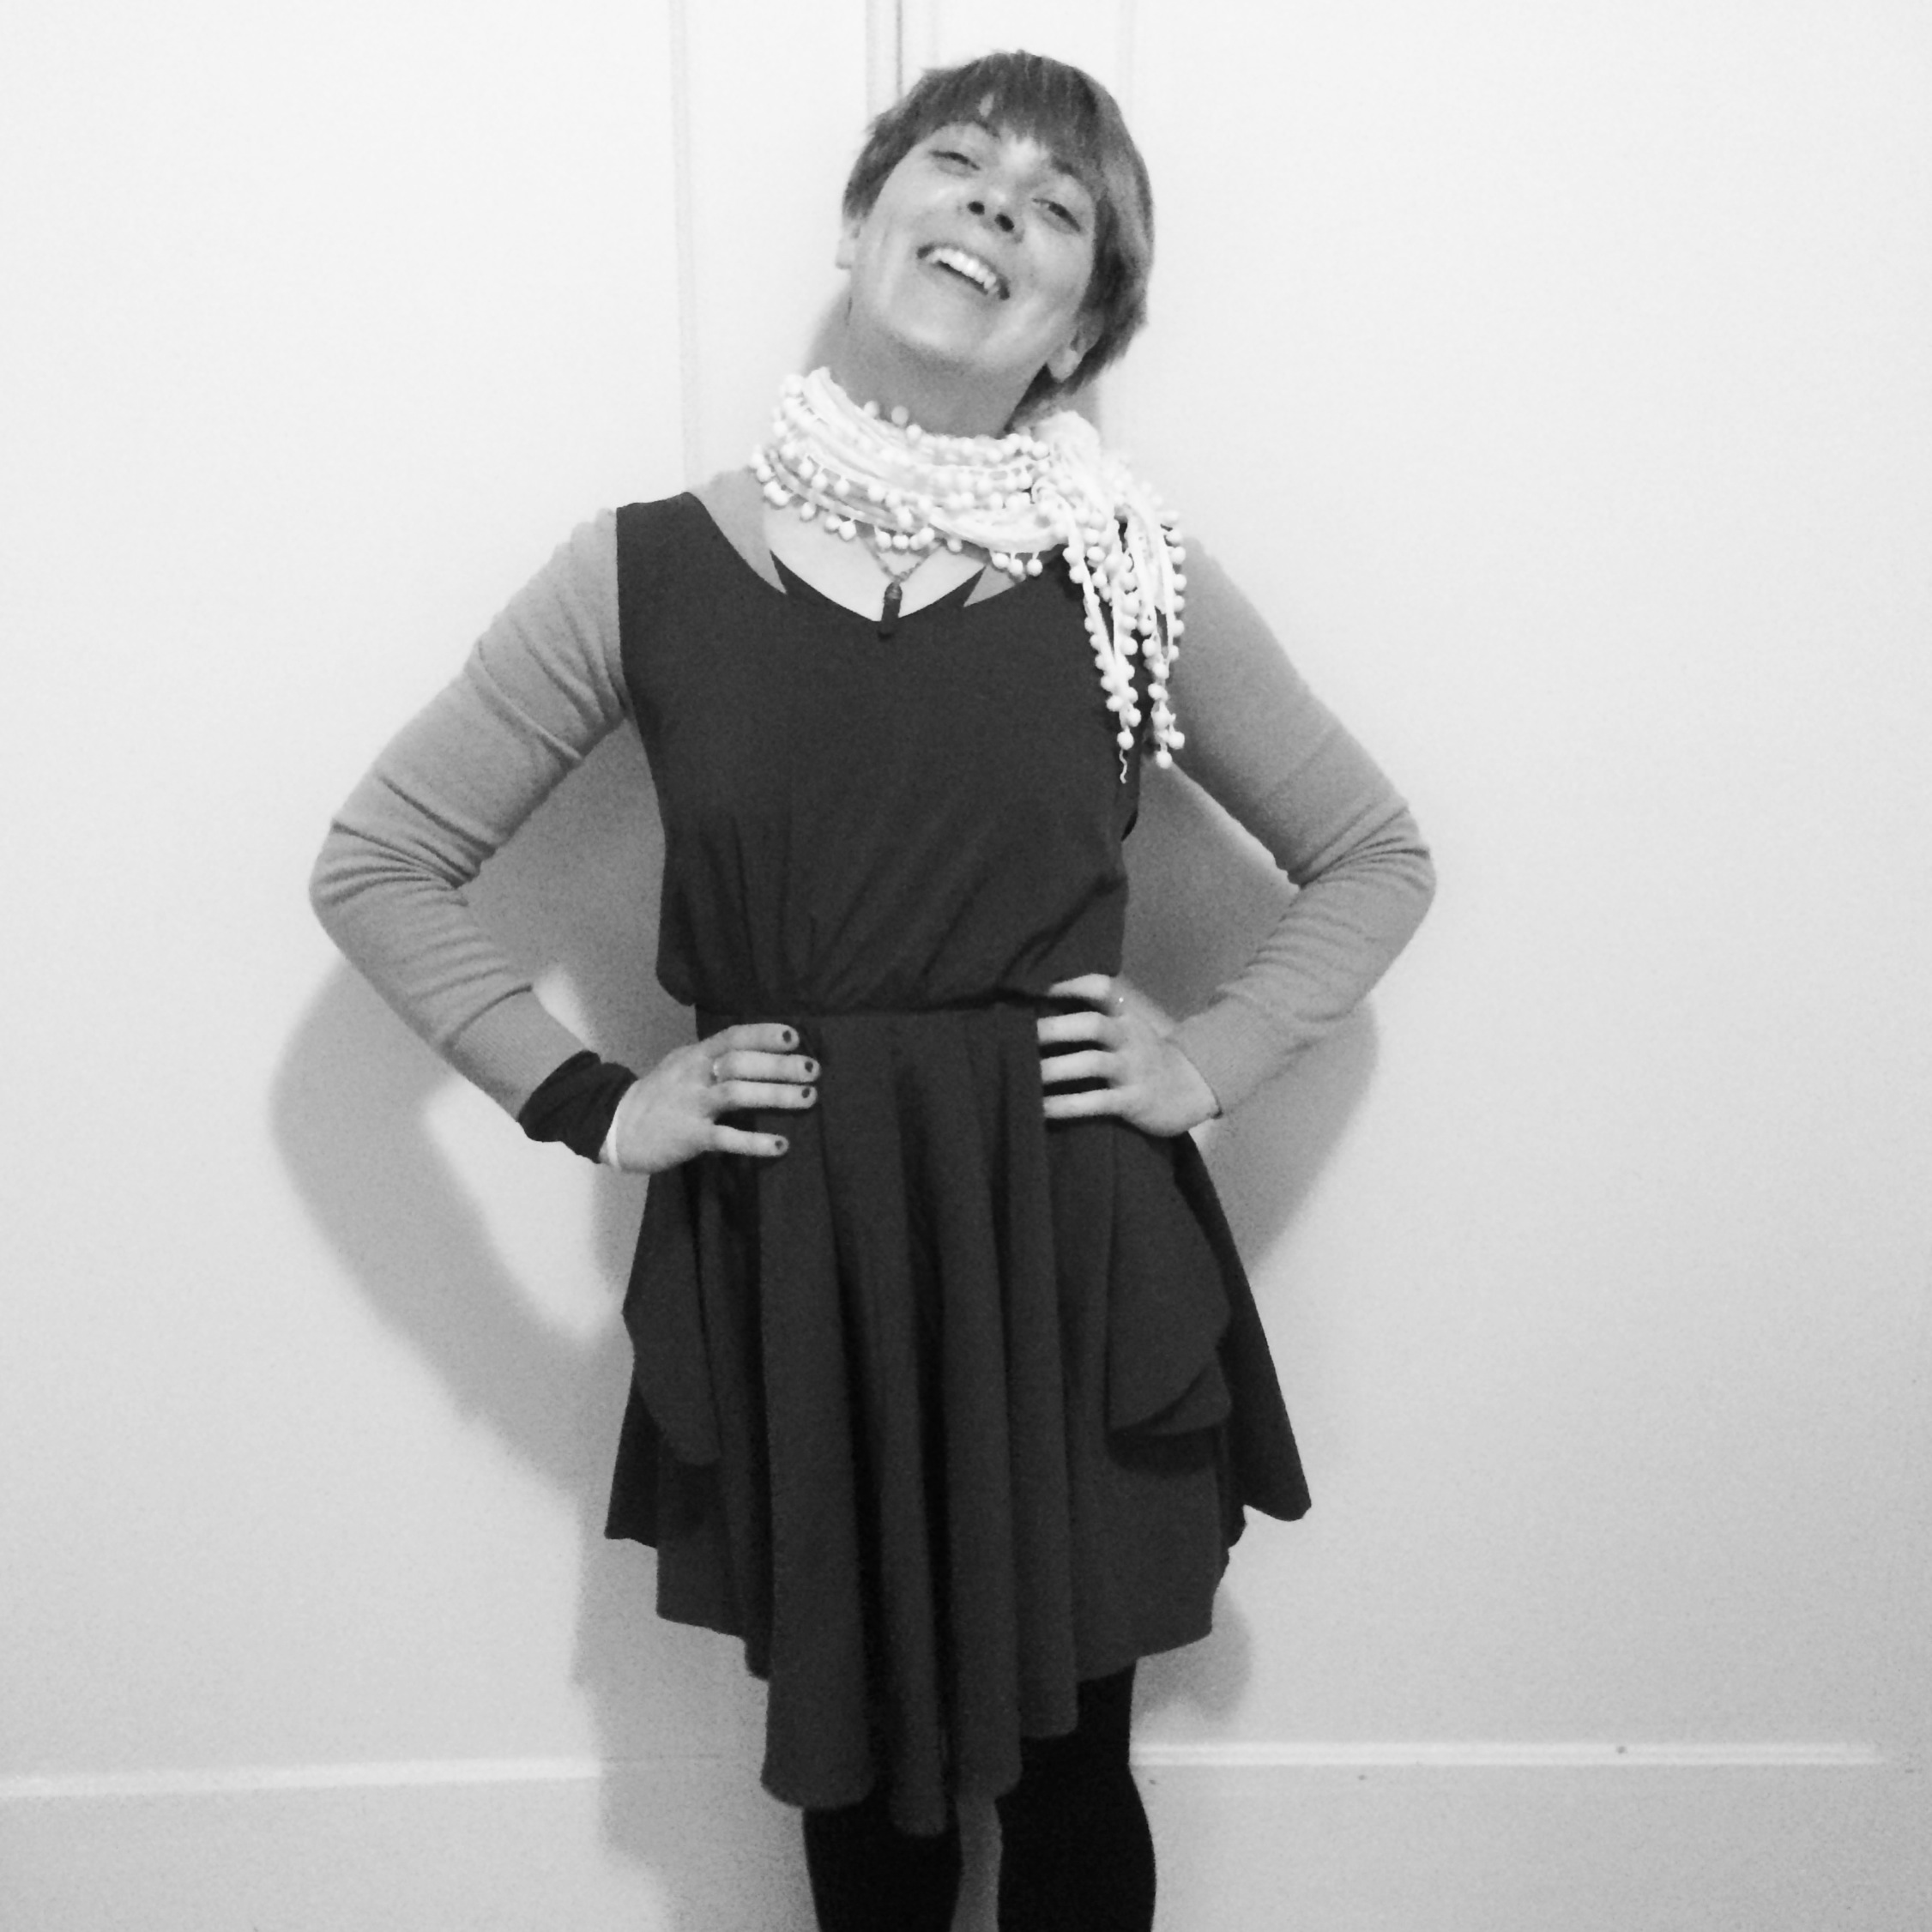 My best self wears sweaters with holes under wrinkly dresses that make me feel like a diva -- just to go buy groceries.